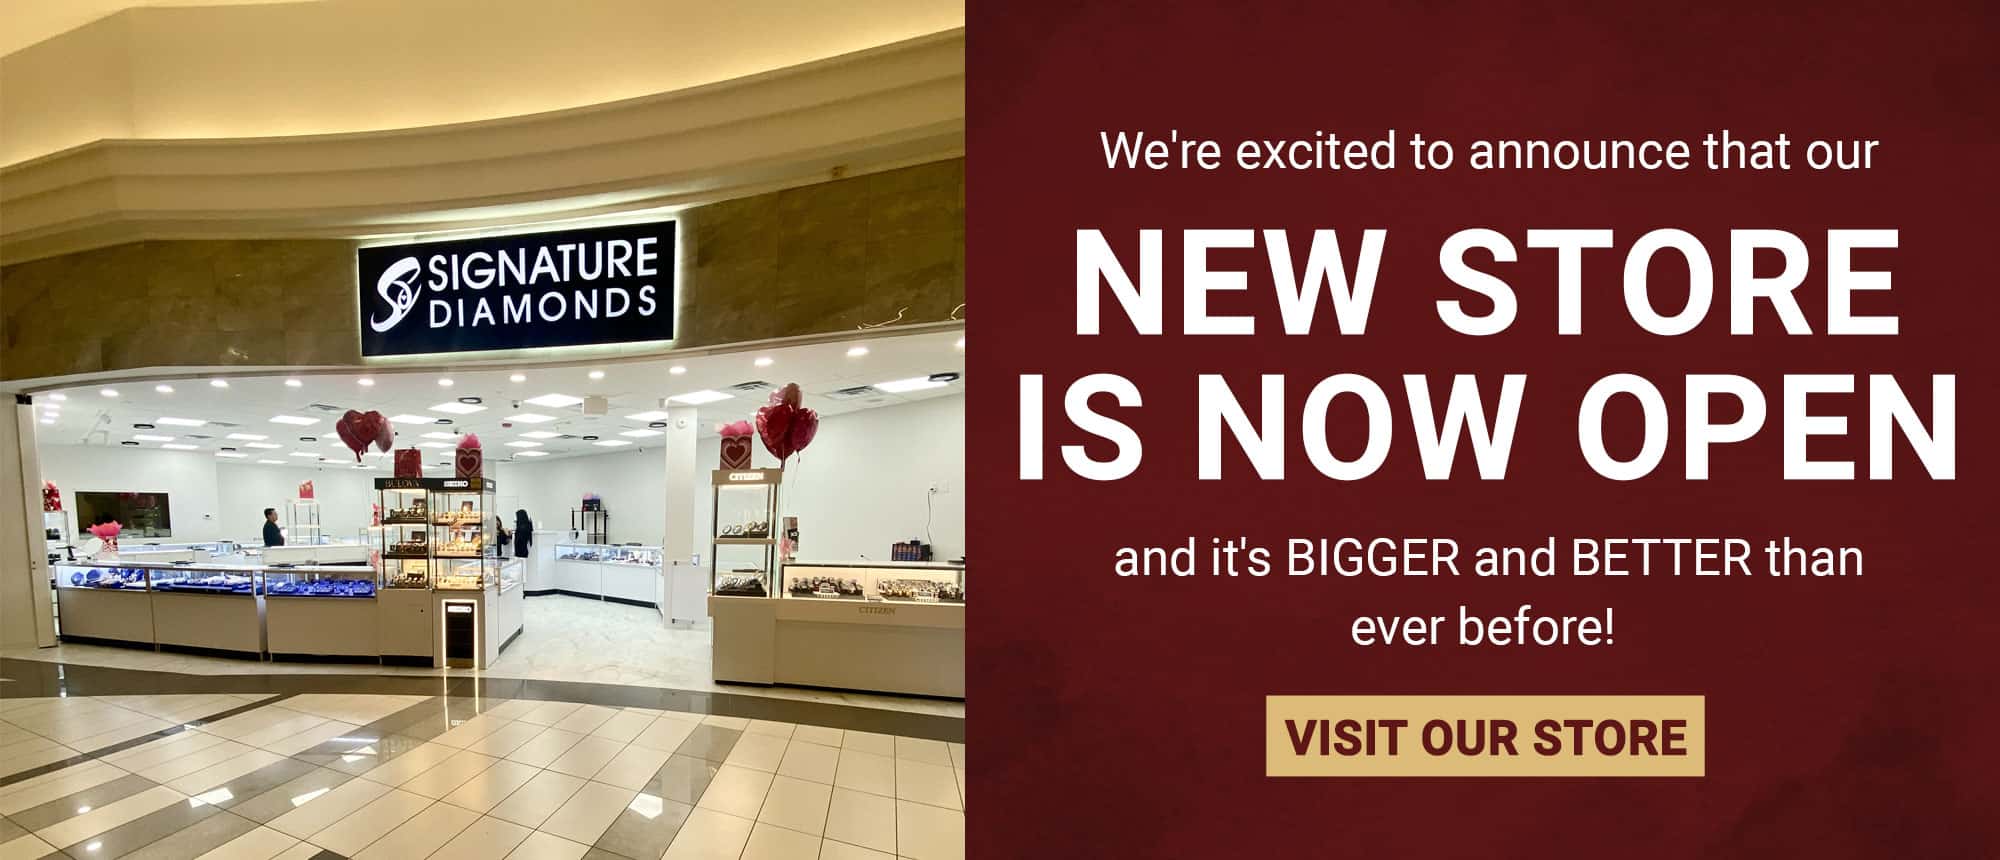 Our New Store Now Open at Signature Diamonds